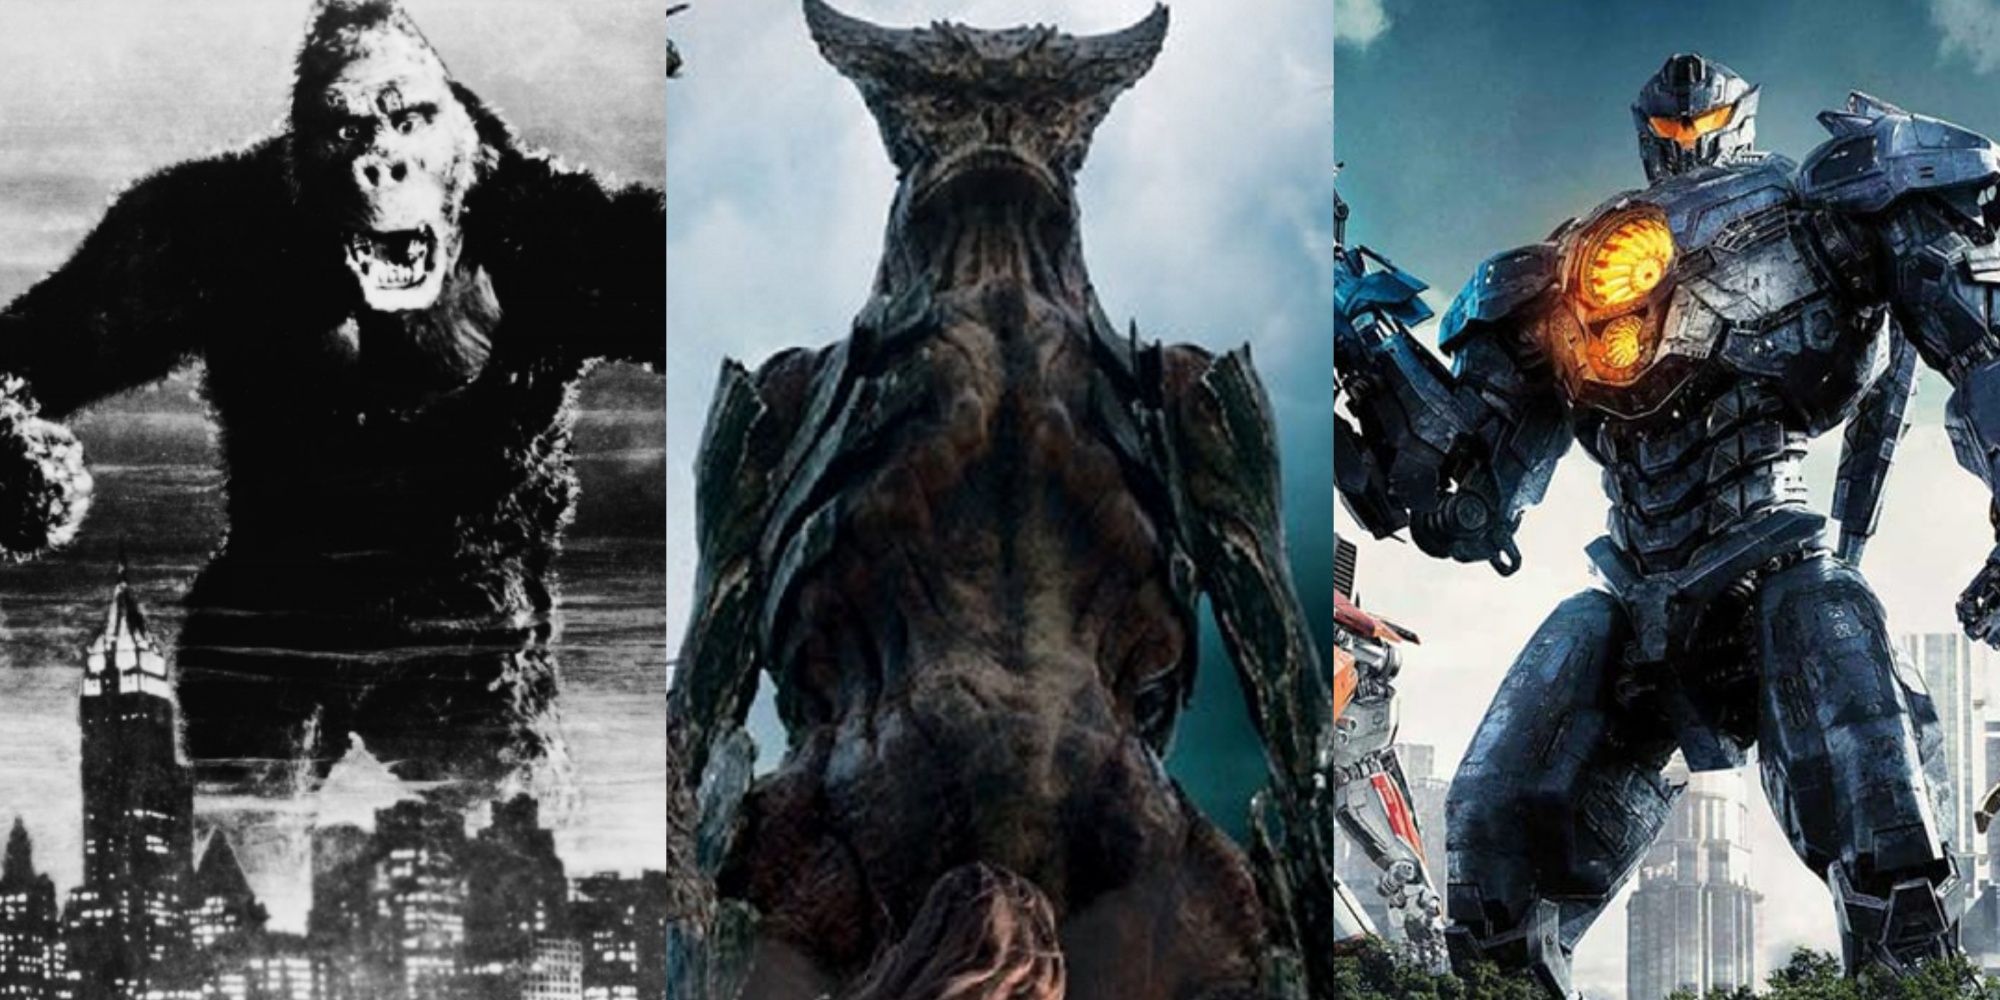 A collage featuring King Kong, the monster from Colossal and a mecha from Pacific Rim.